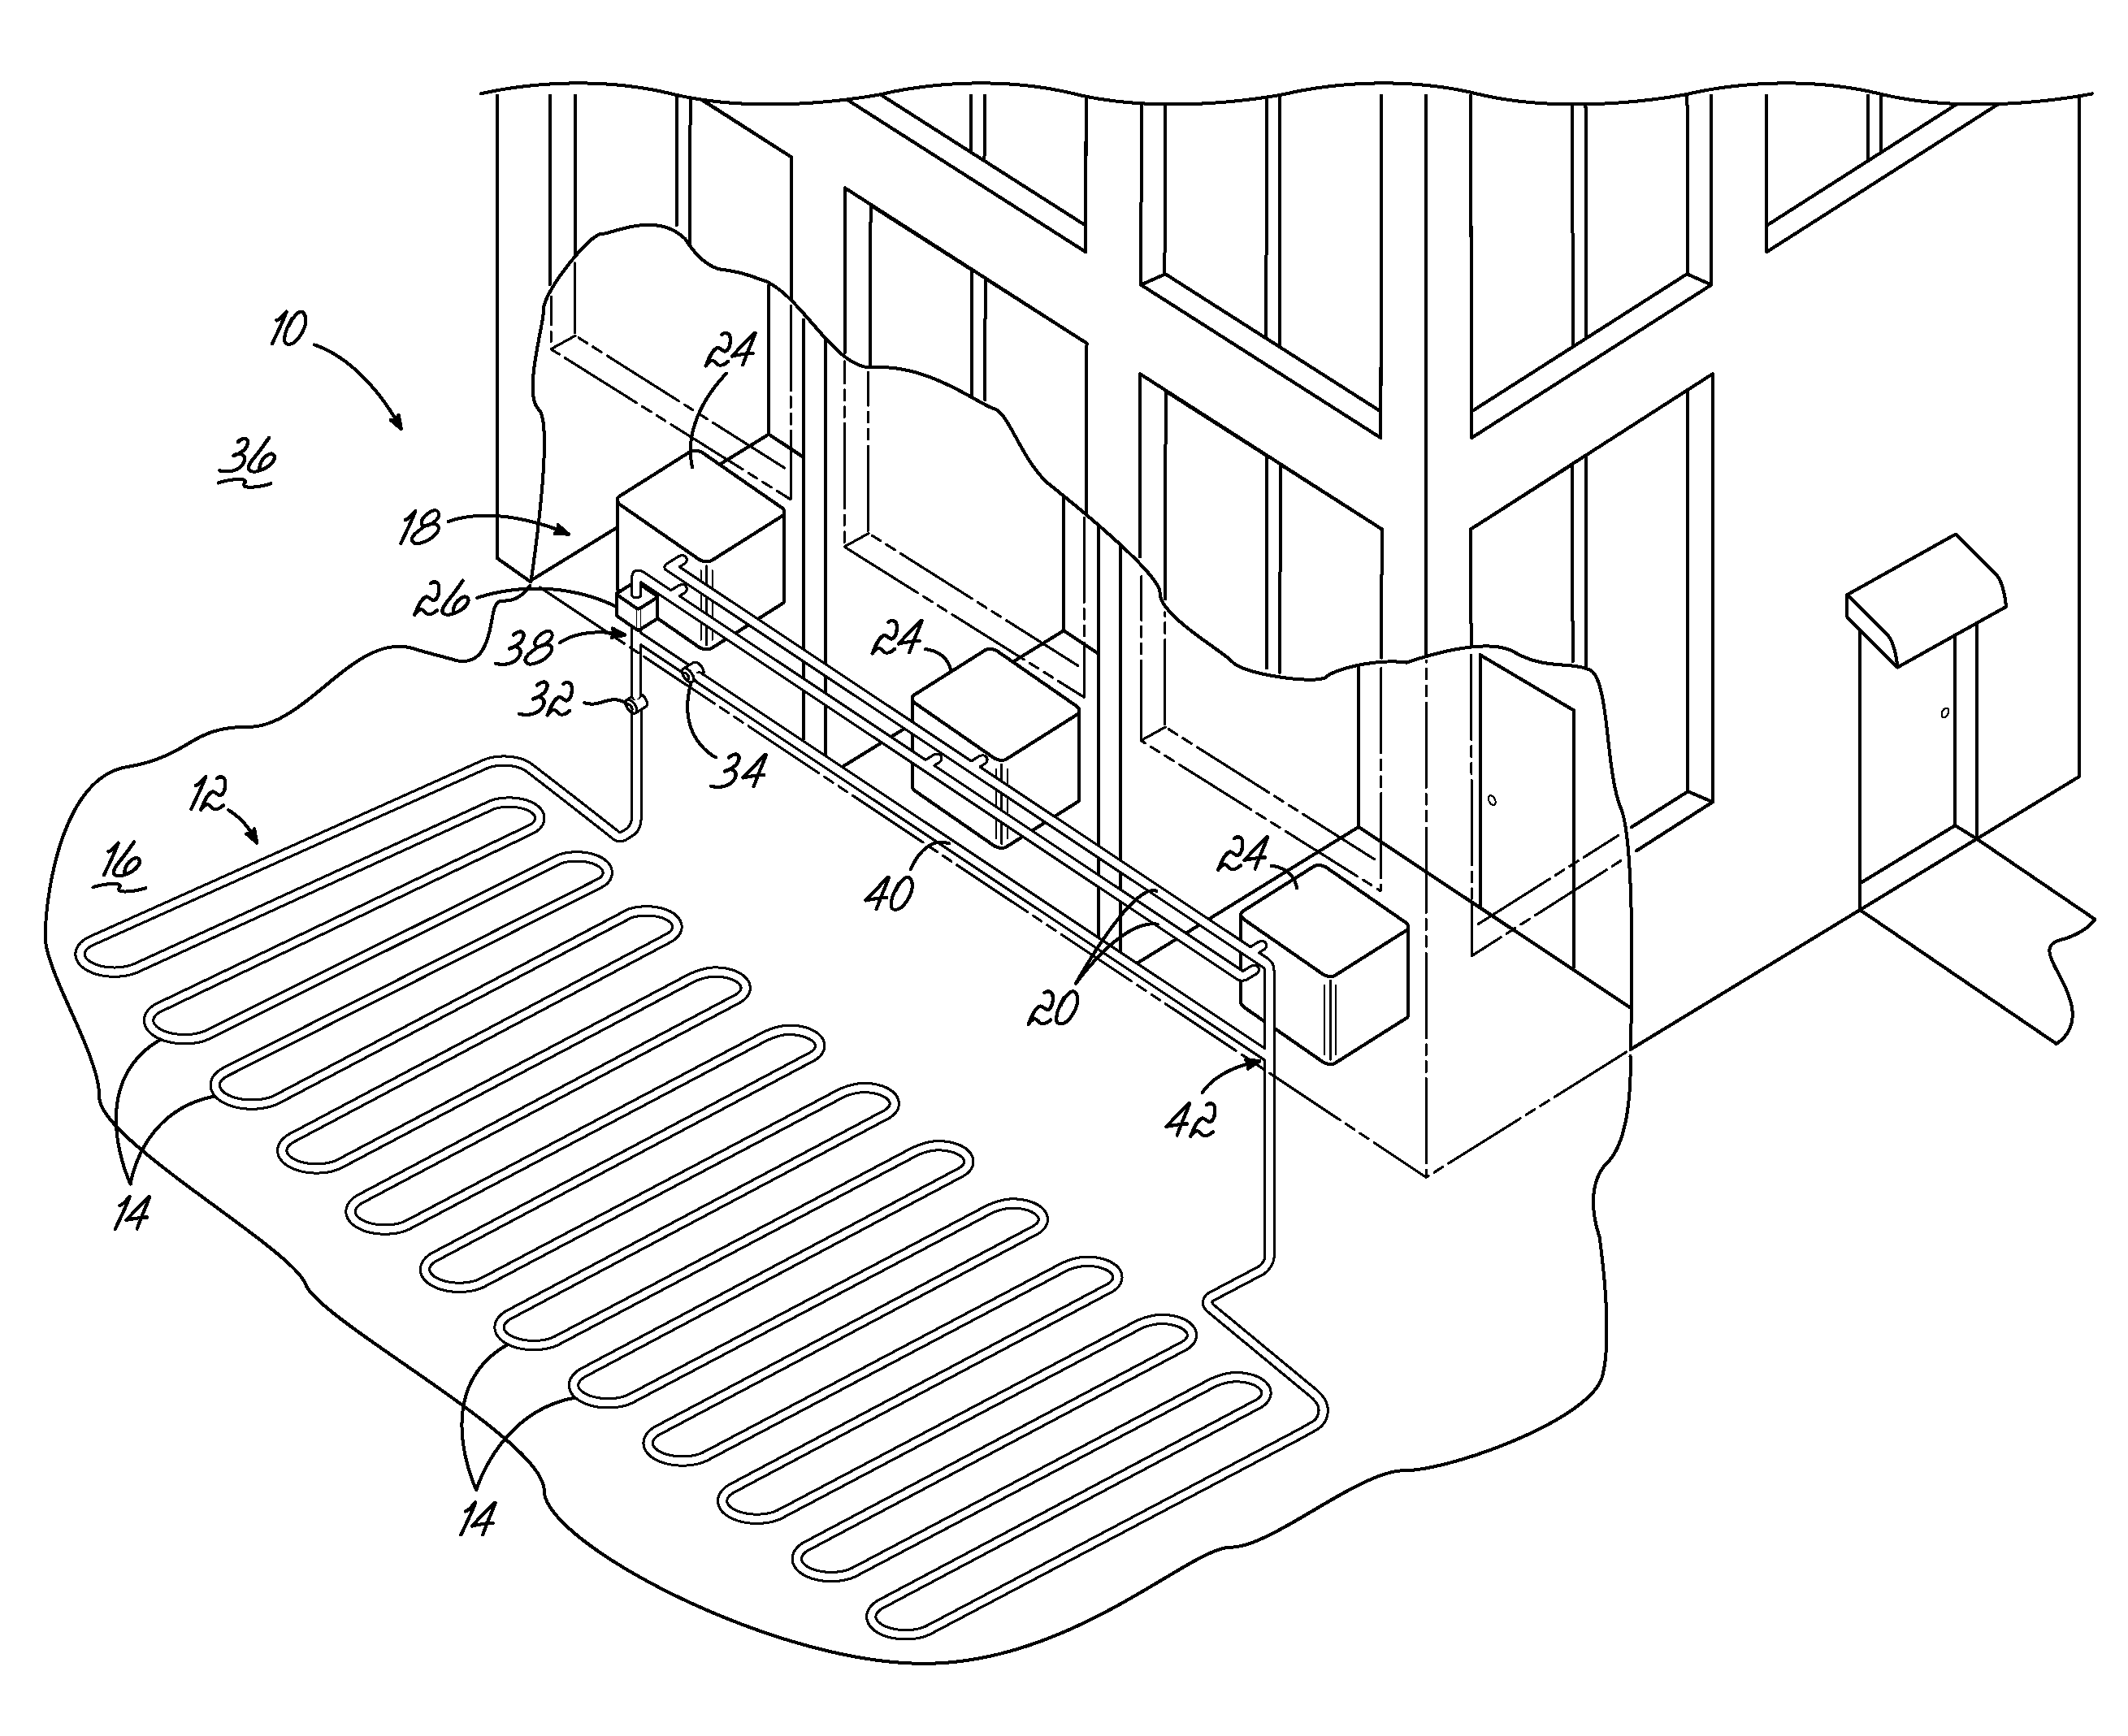 Ground loop bypass for ground source heating or cooling